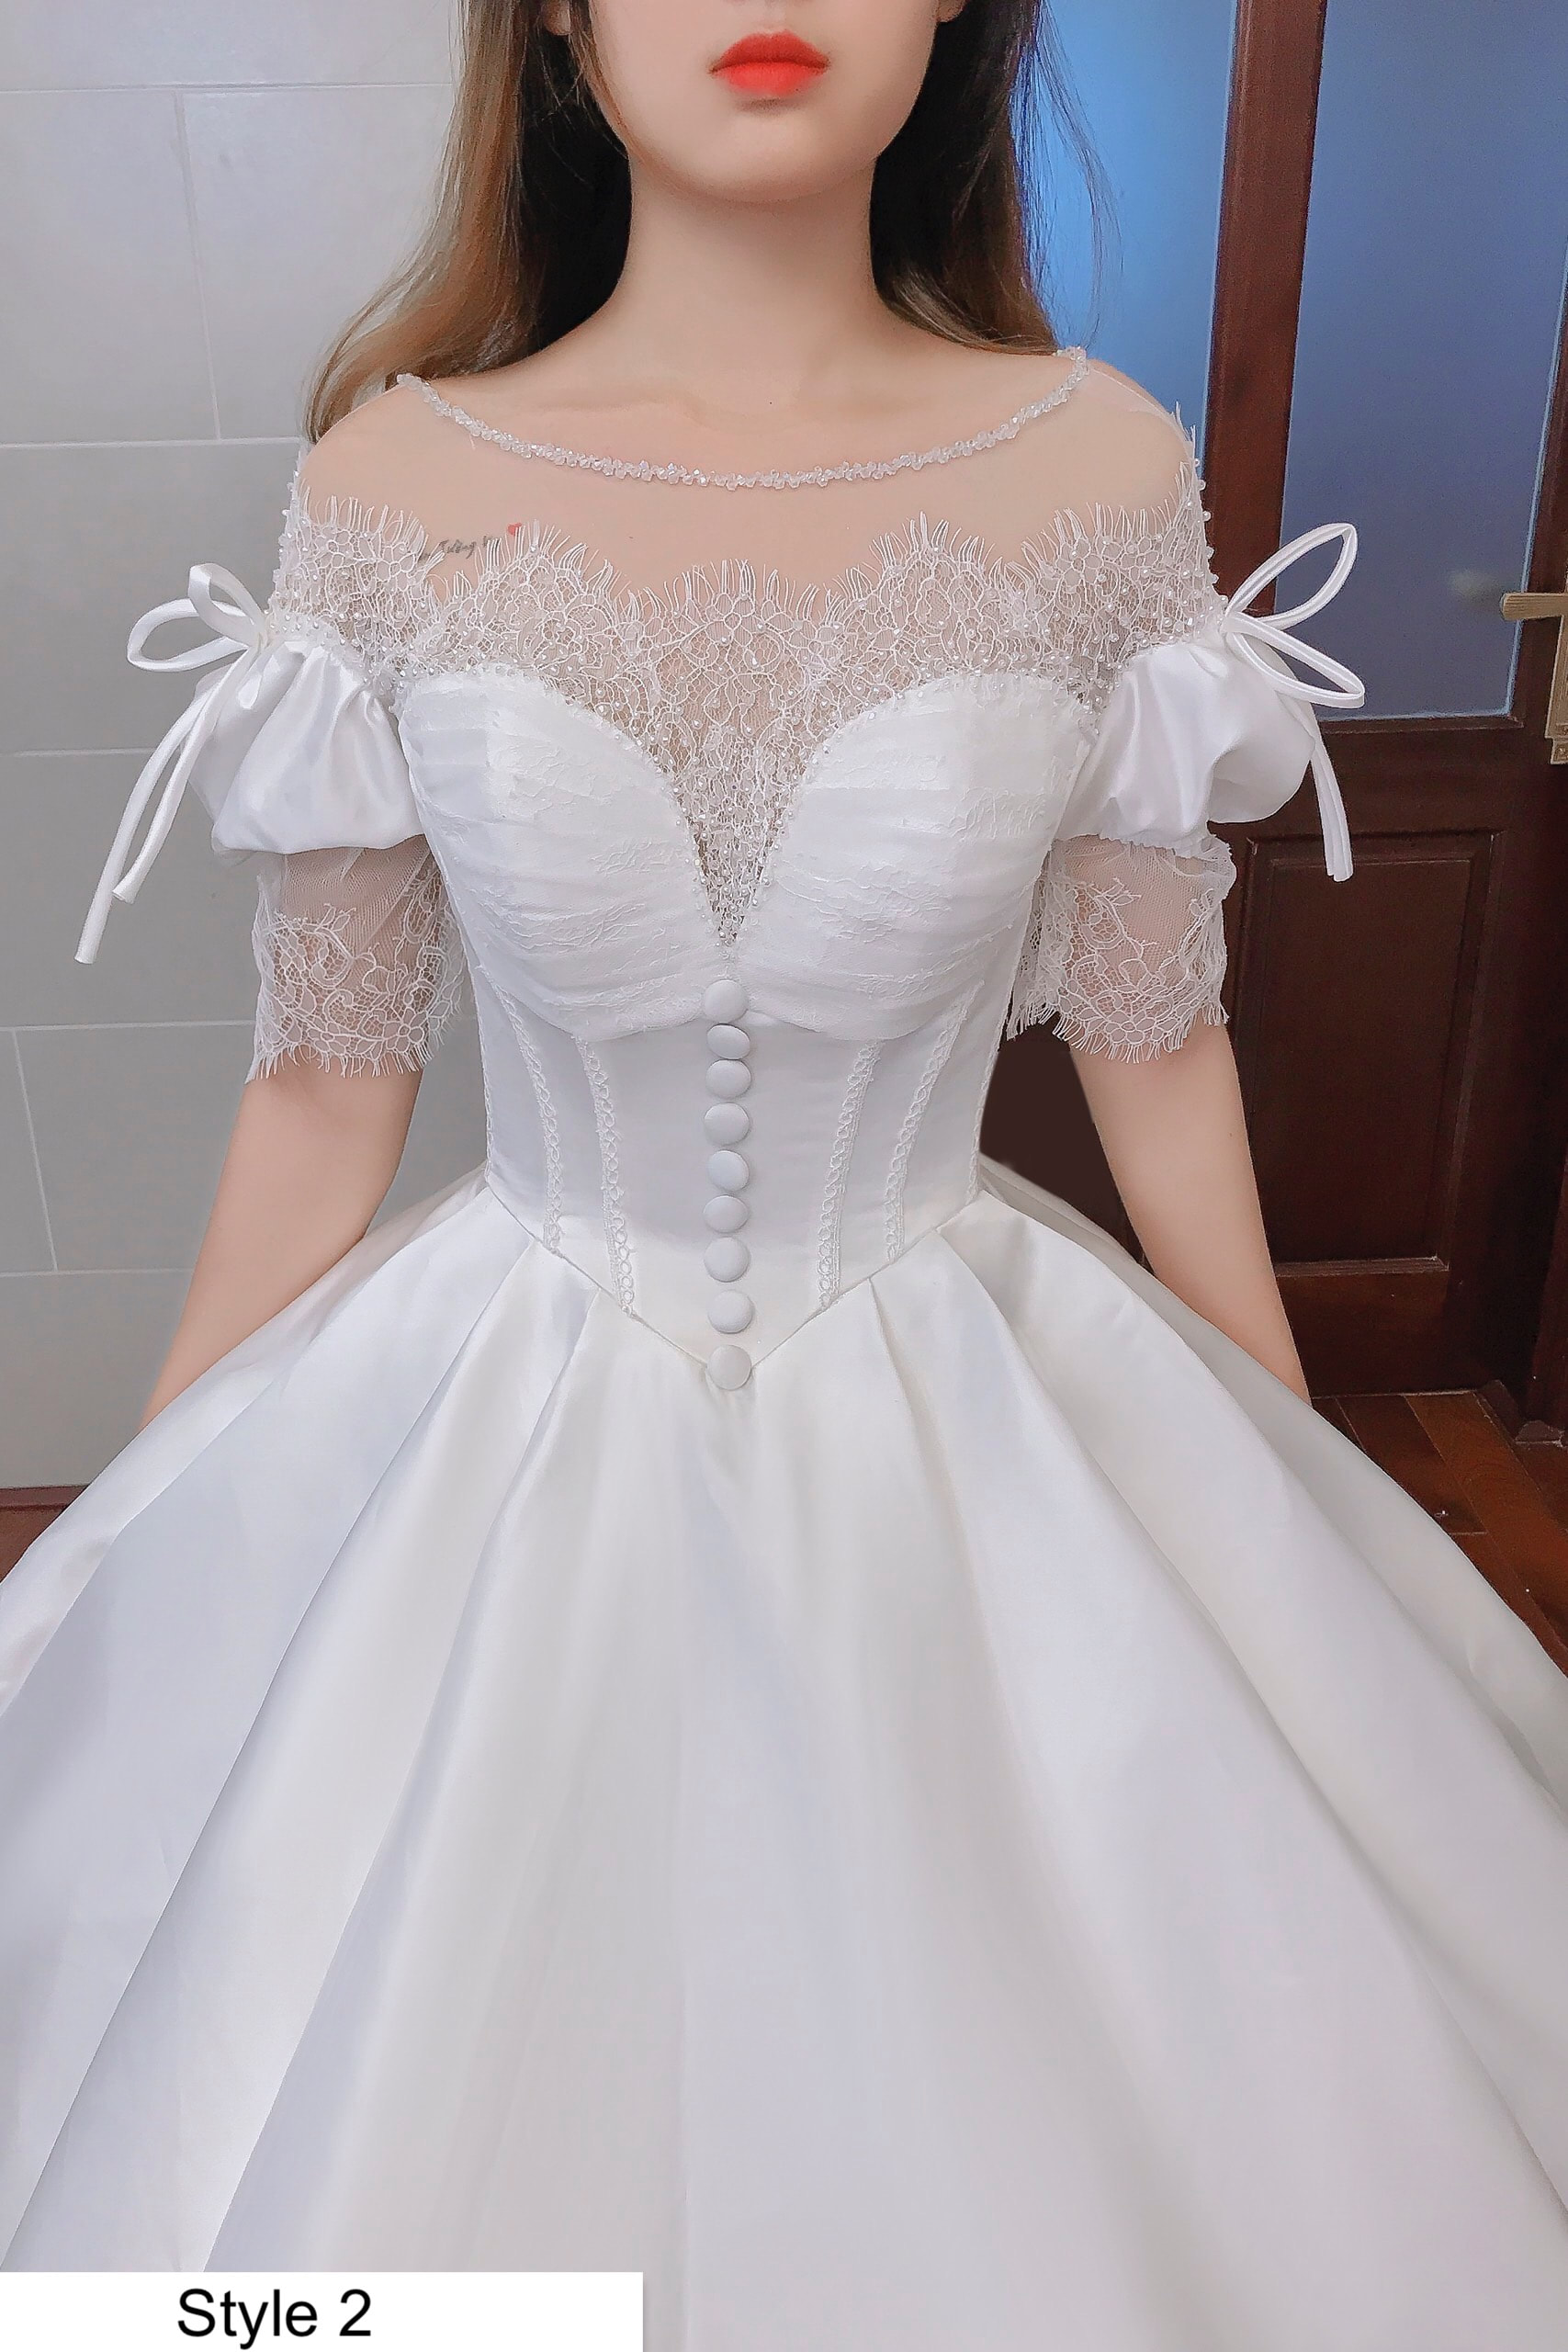 Beautiful royal vintage inspired white satin wedding dress with lace